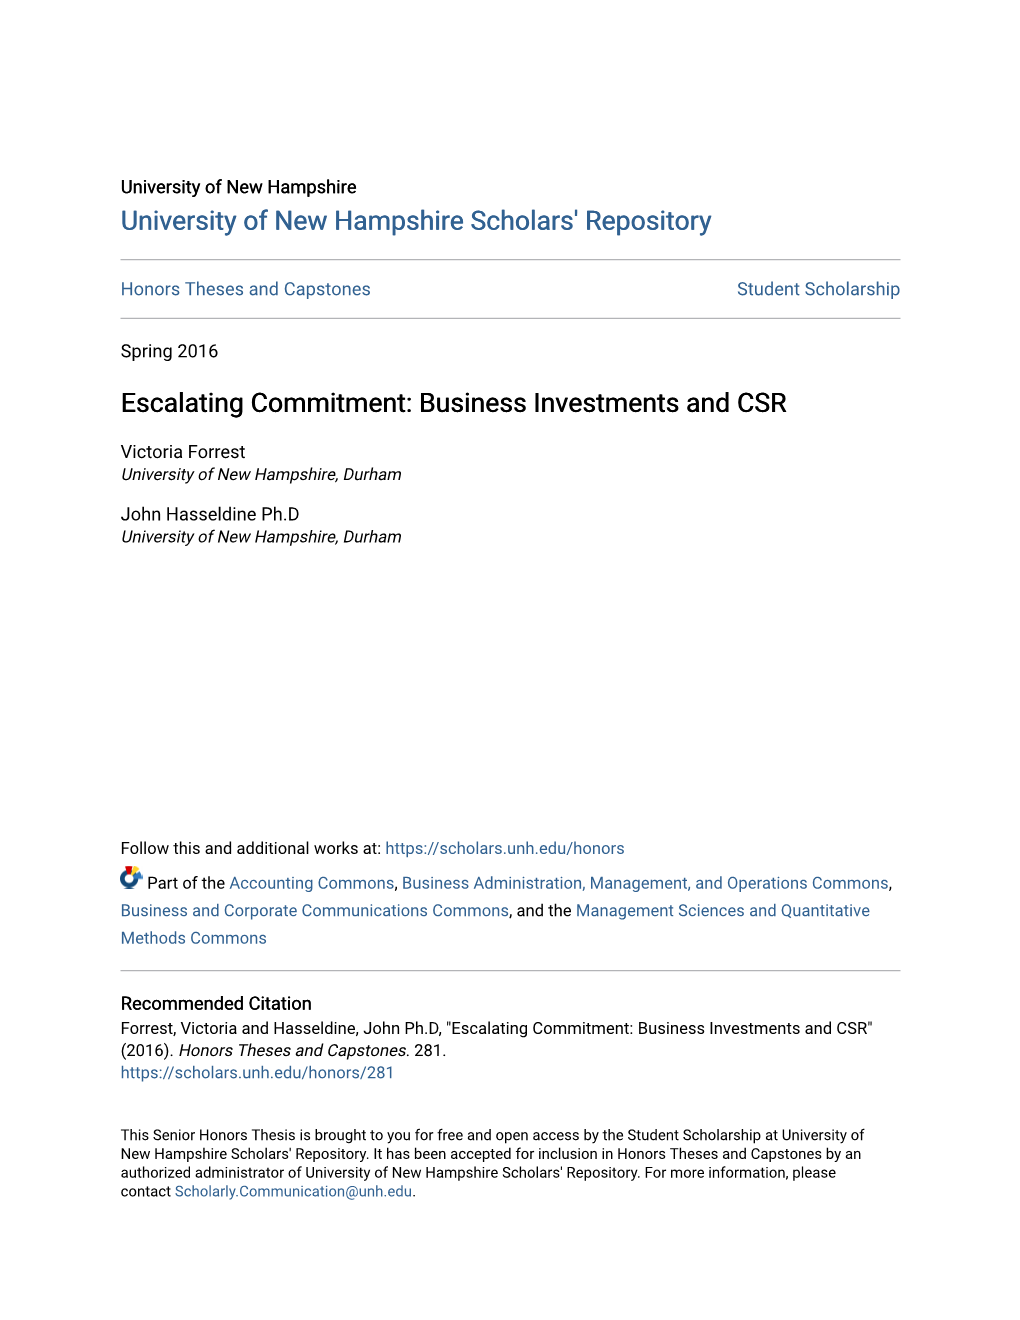 Escalating Commitment: Business Investments and CSR